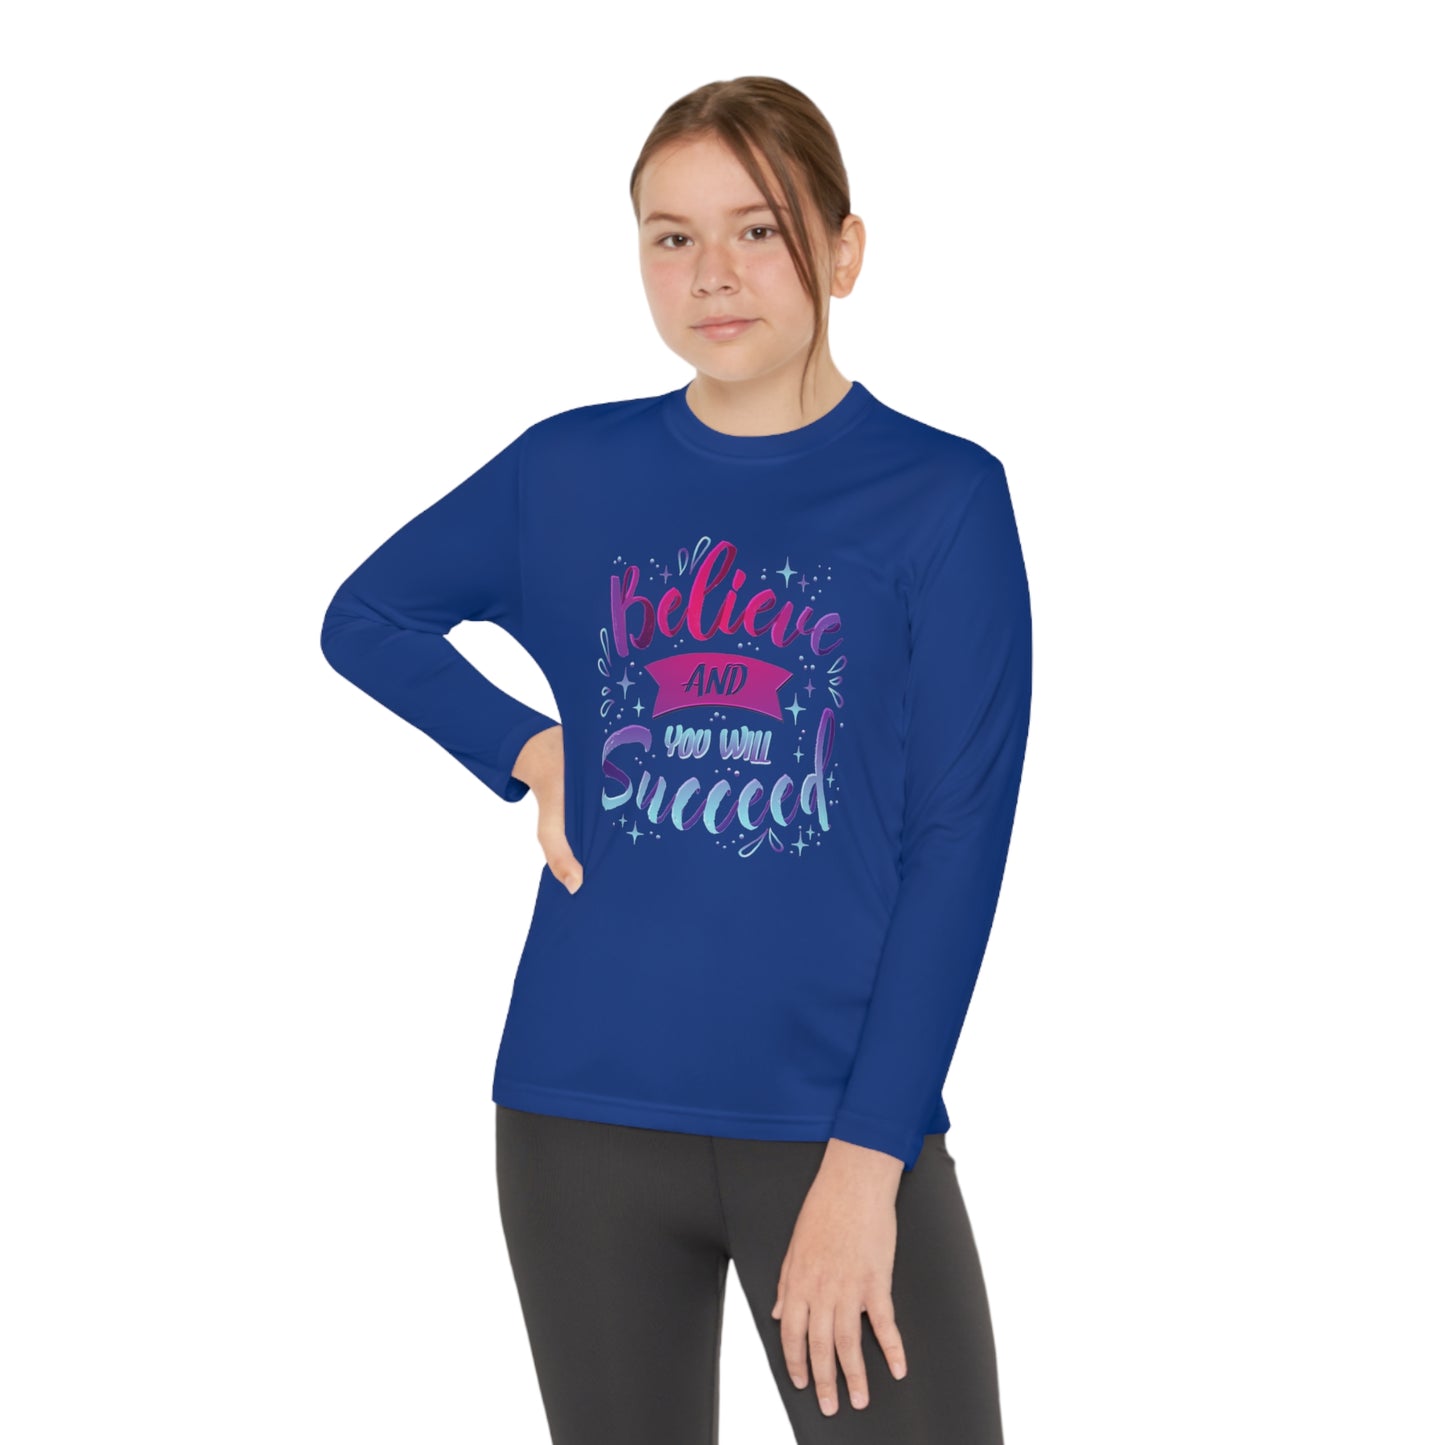 Niccie's Believe for Success: Youth Long Sleeve Competitor Tee